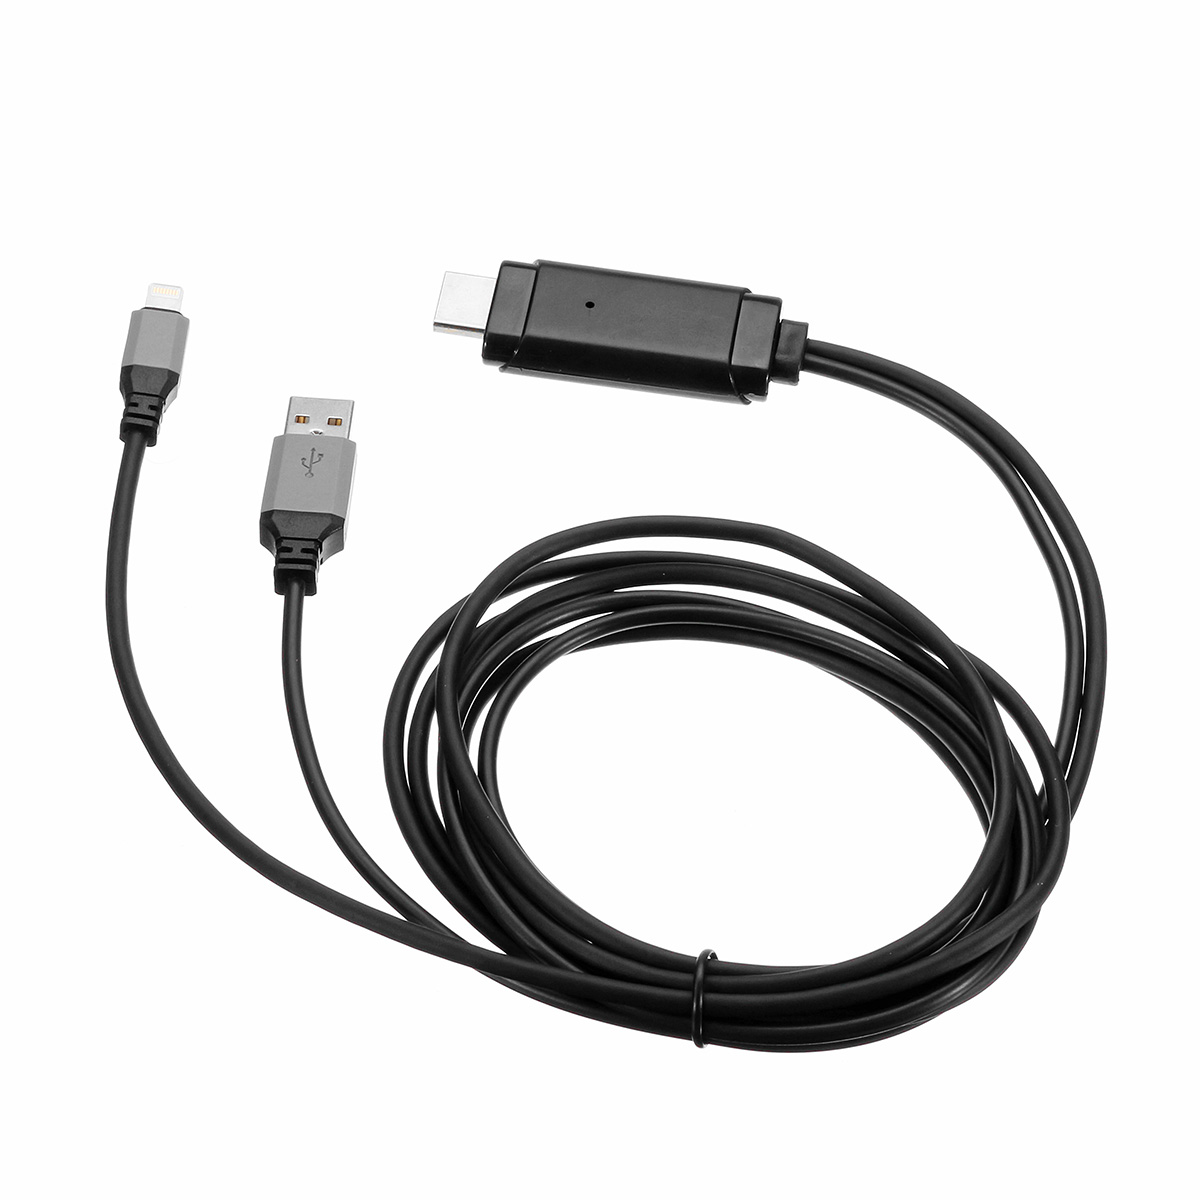 Bakeey-USB-to-HDMI-Adapter-Cable-Support-8-Channels-Digital-Audio-Support-AirplayMirroring-2M-Long-1940268-11